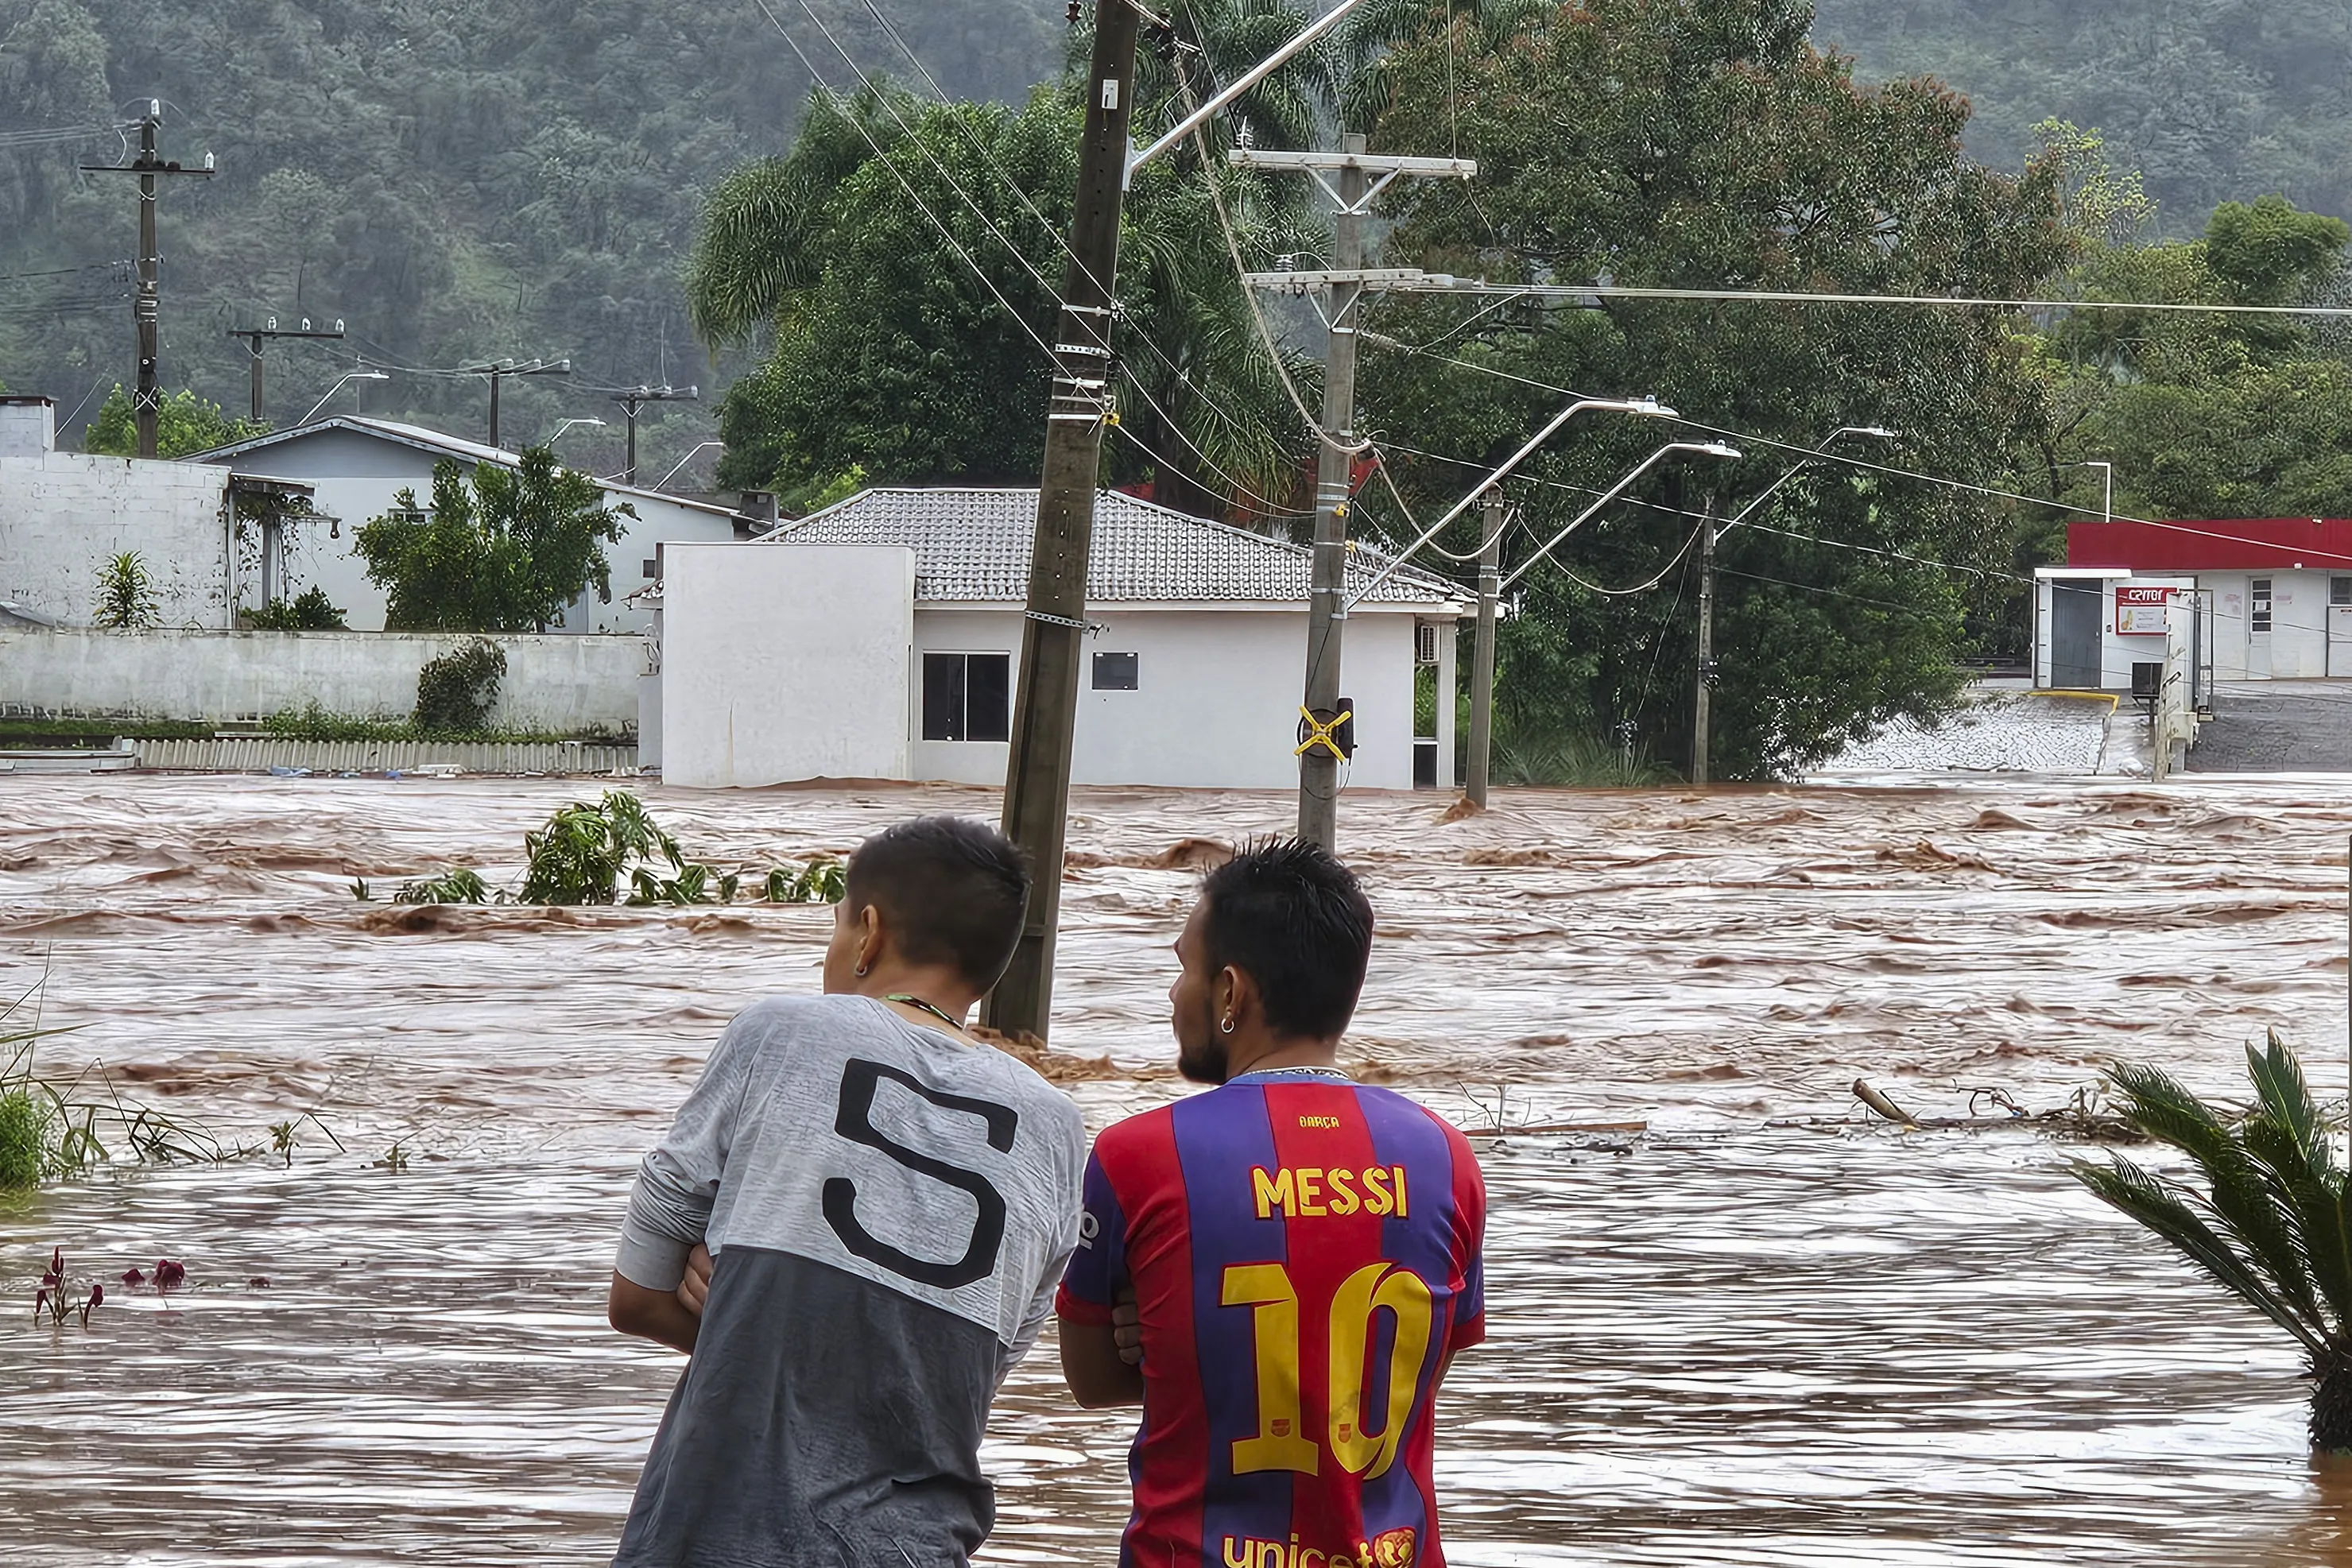 People observe a flooded street after heavy rains in Encantado, Rio Grande do Sul, Brazil on May 1, 2024. At least ten people died and 21 are missing due to heavy rains in the southern Brazilian state of Rio Grande do Sul, authorities said Wednesday. (Photo by Gustavo Ghisleni / AFP)